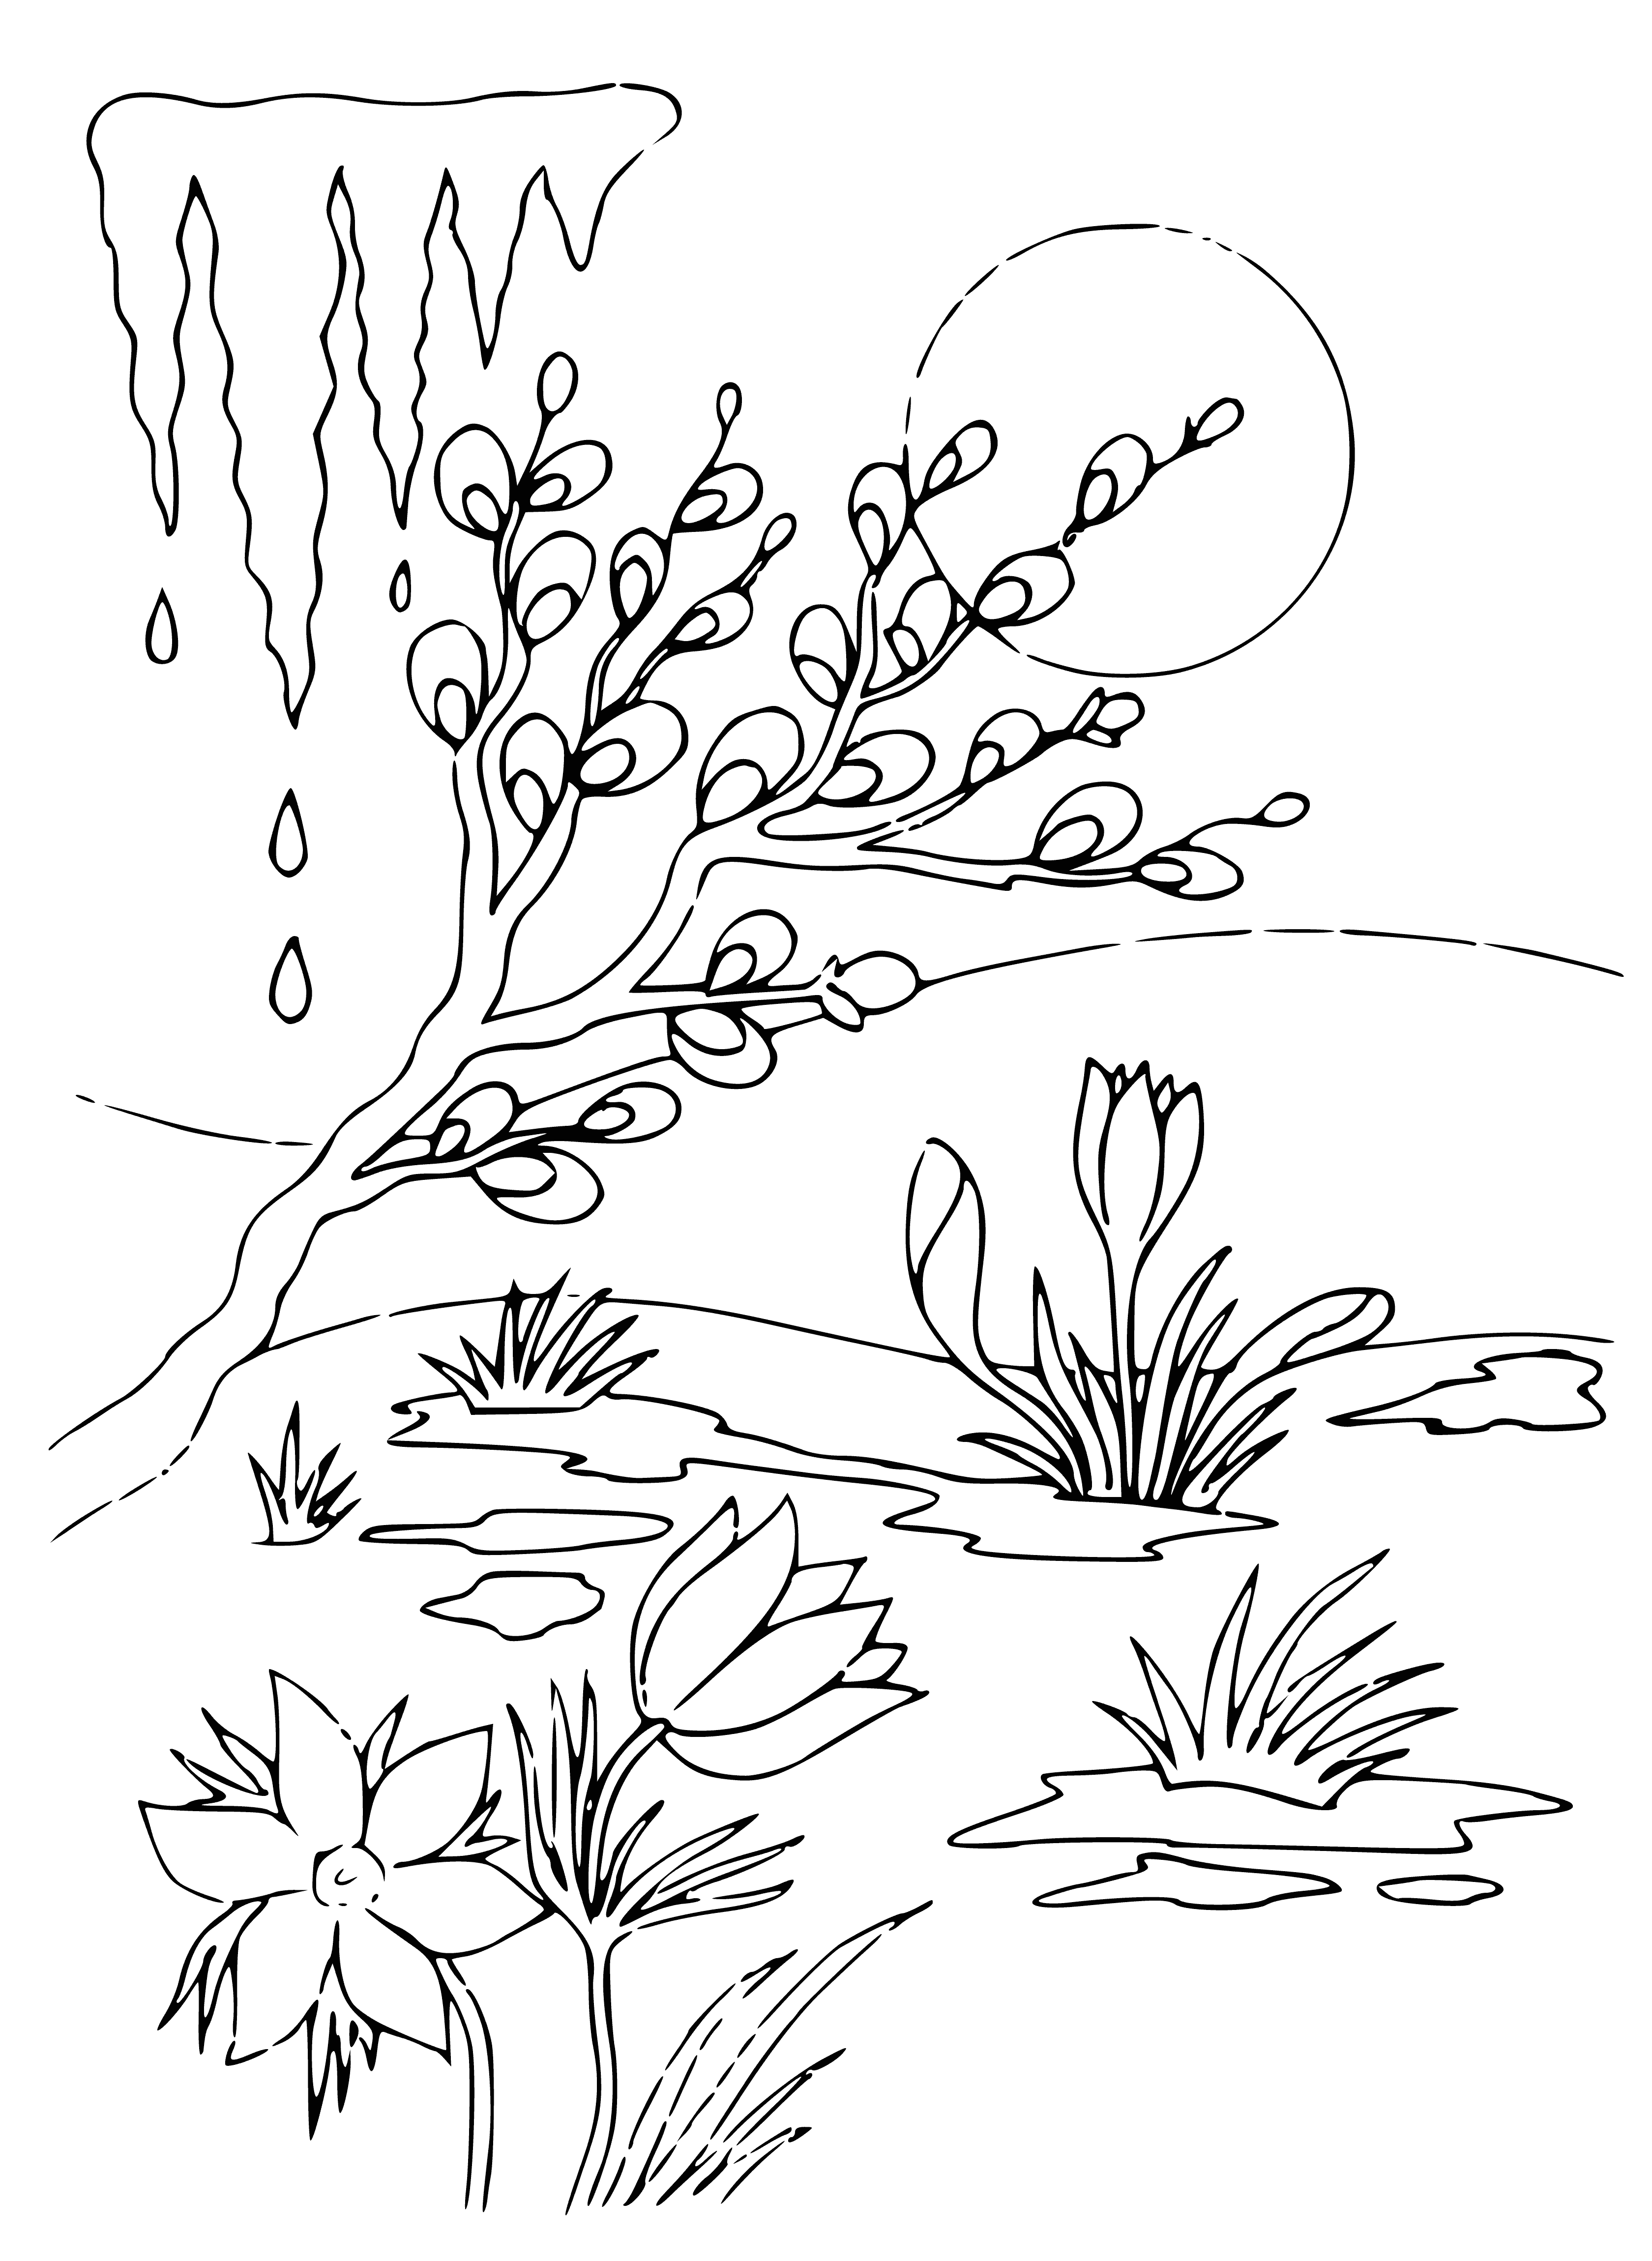 Thaw coloring page